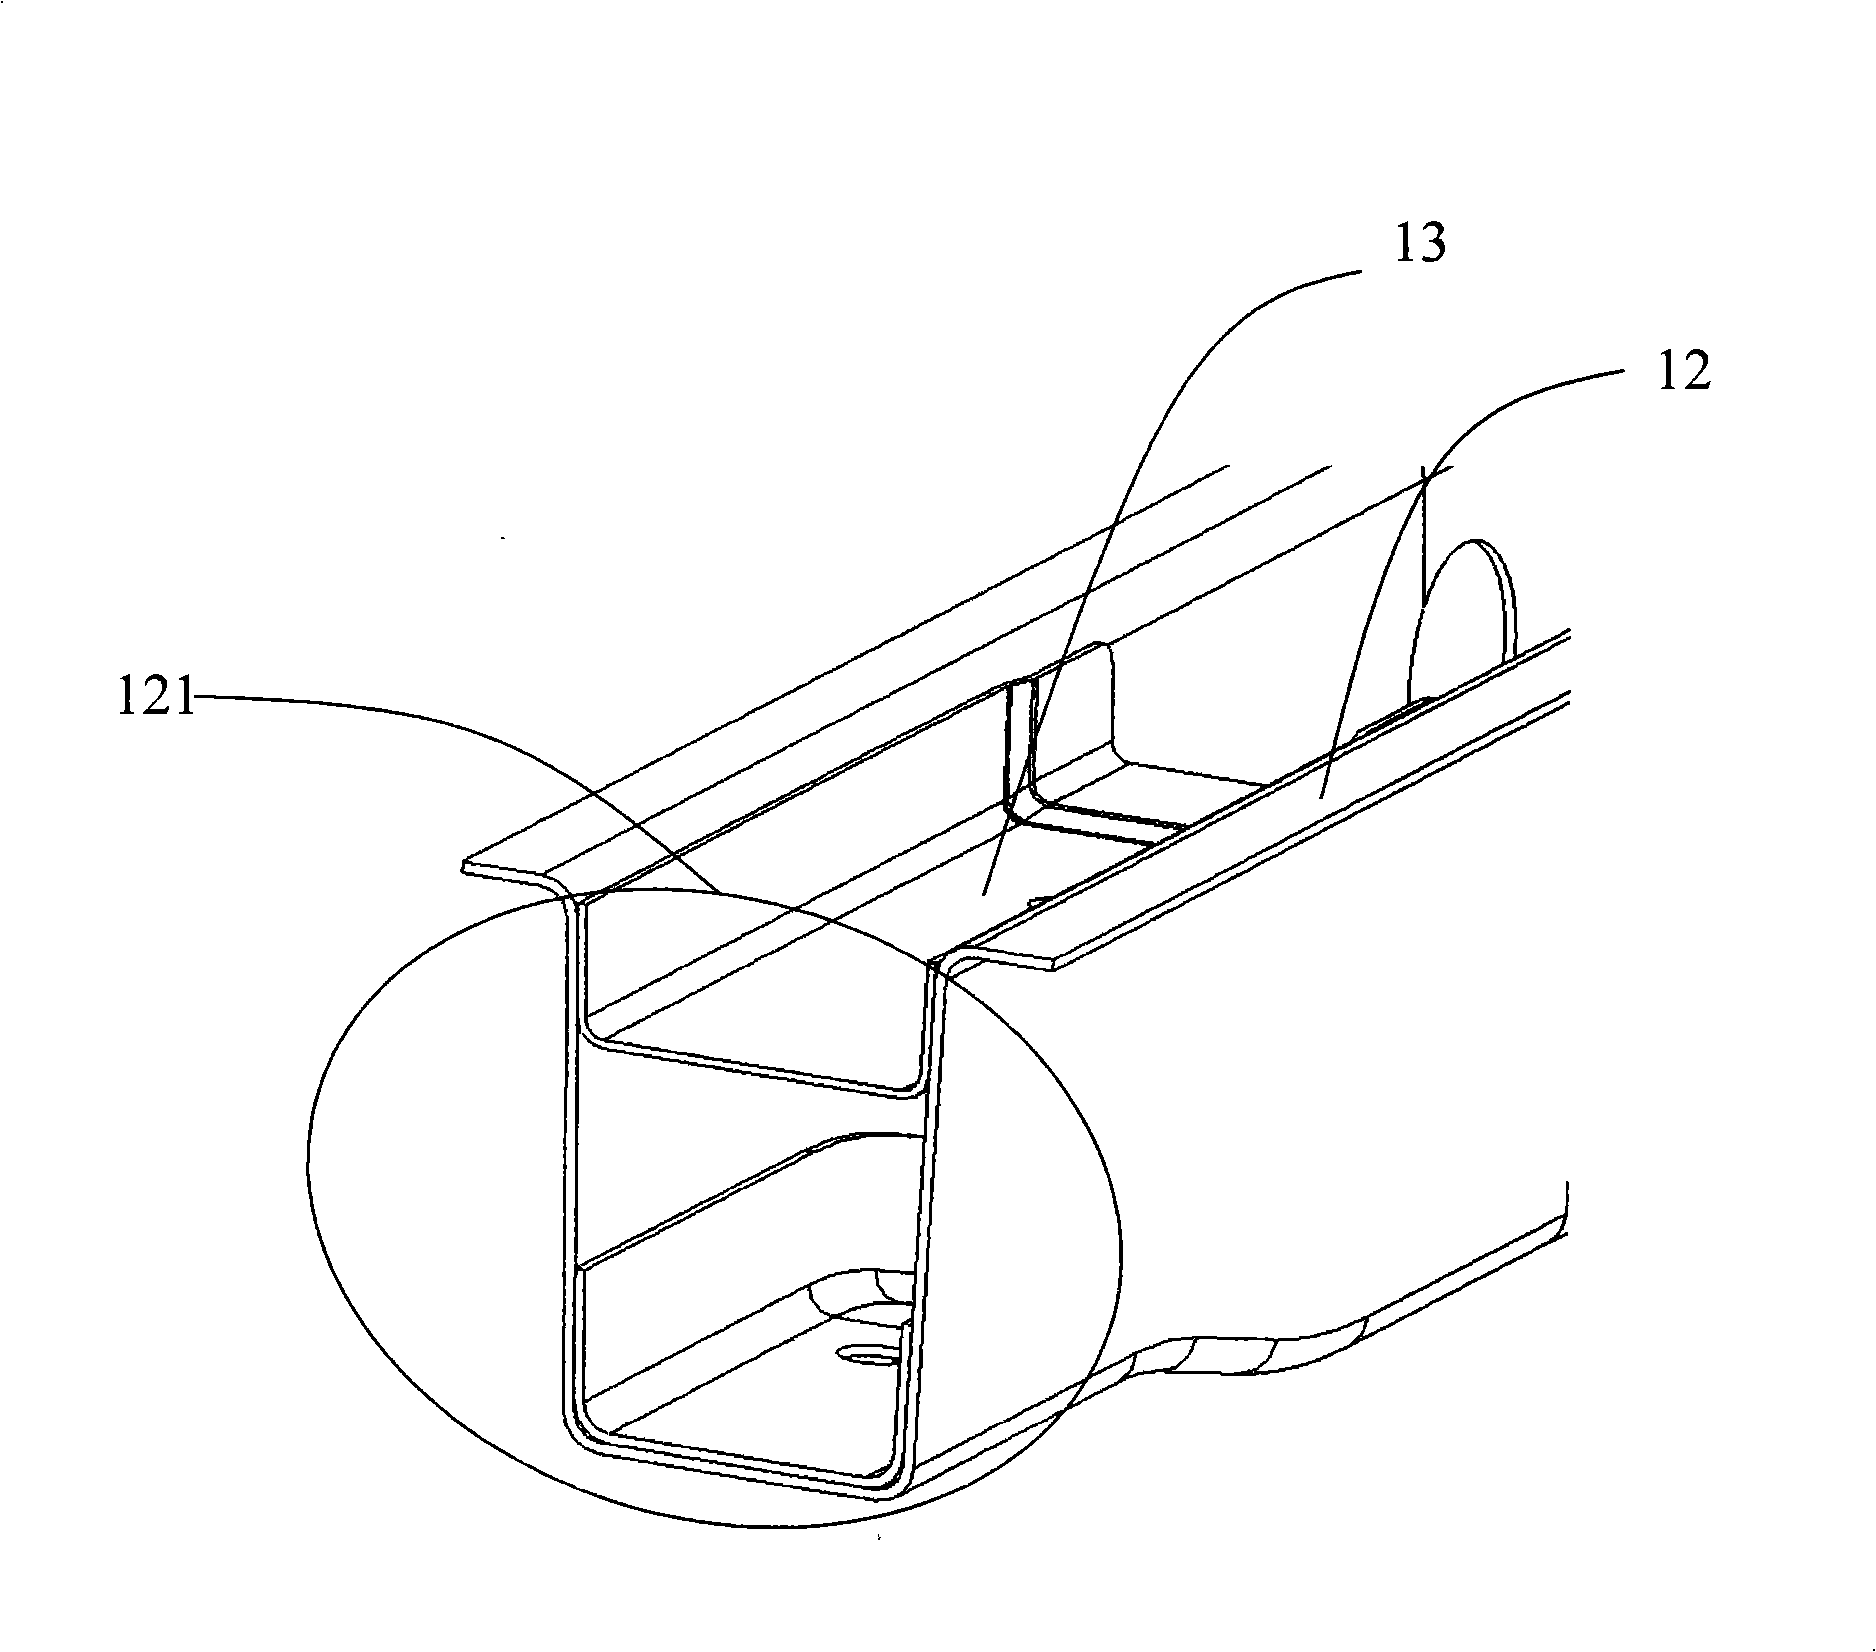 Cycle frame structure of vehicle